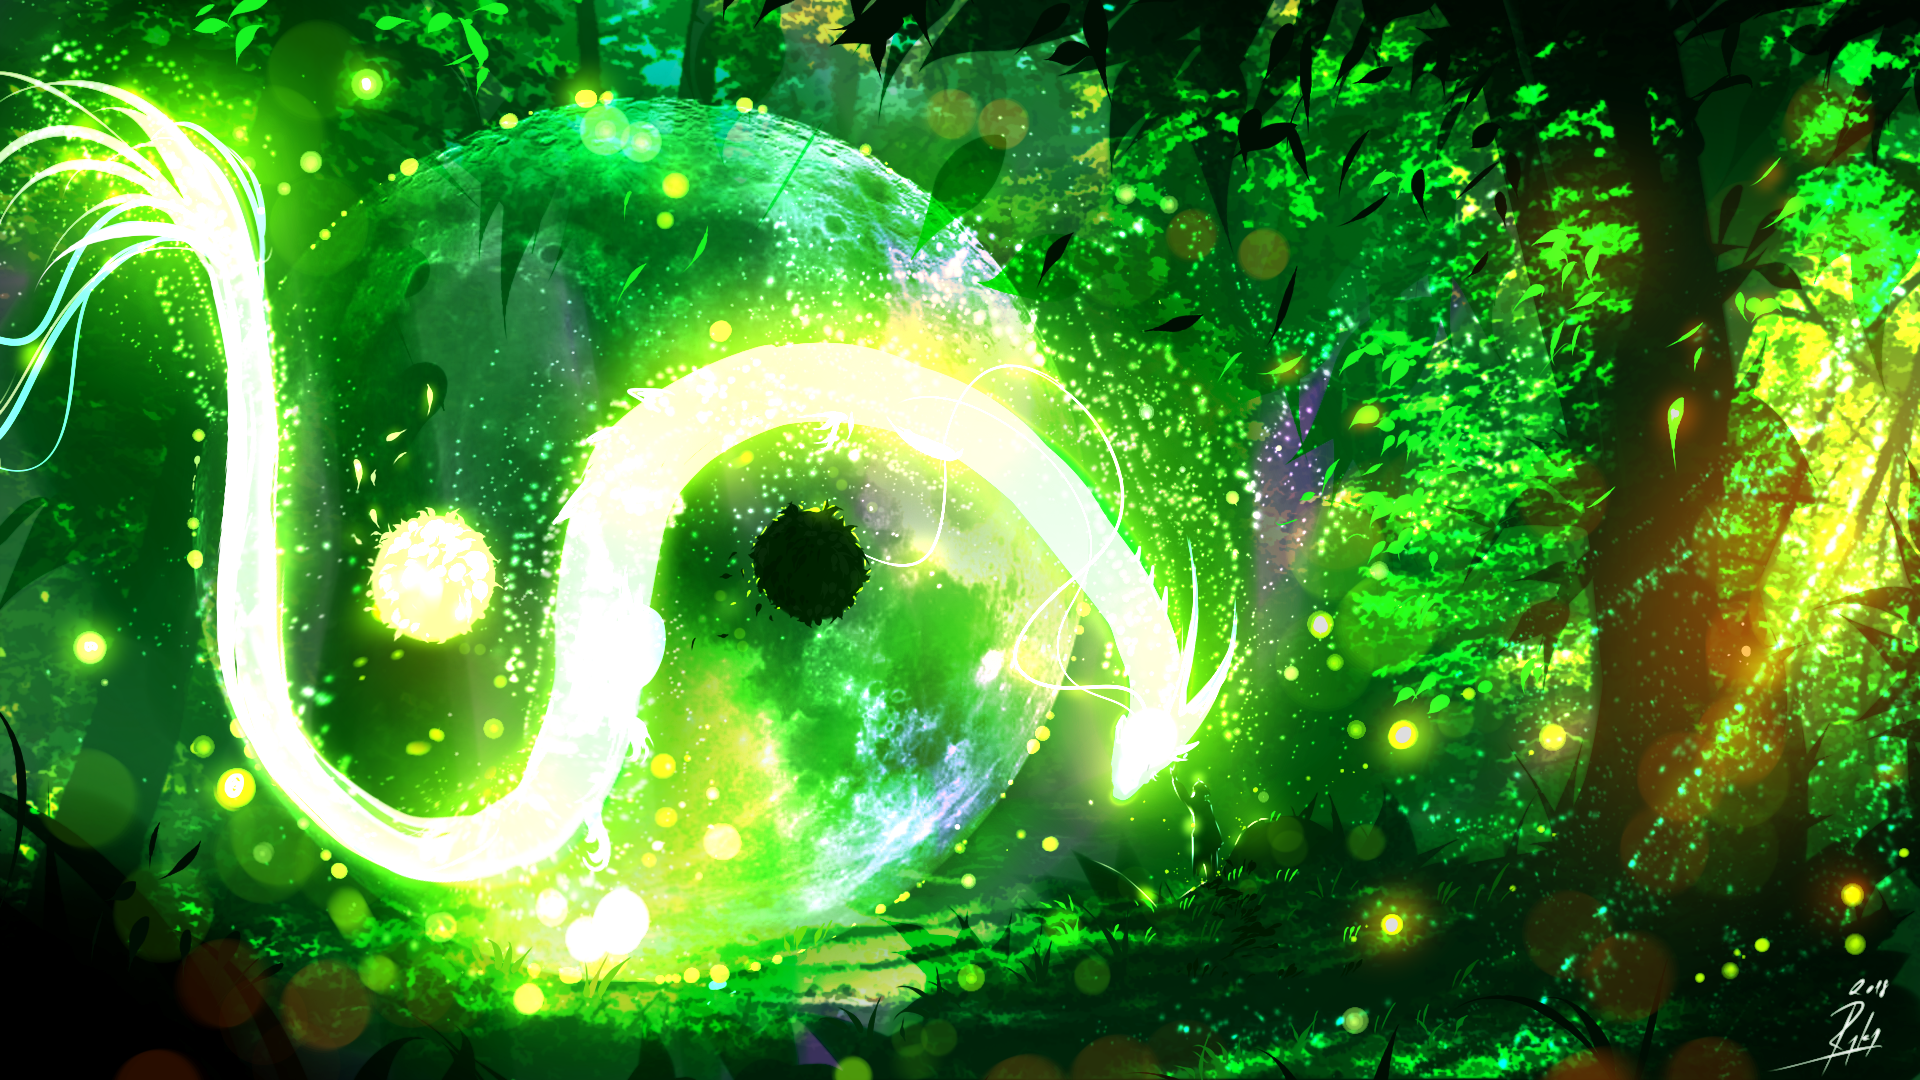 Ryky Painting Digital Art Dragon Yin And Yang Forest 1920x1080